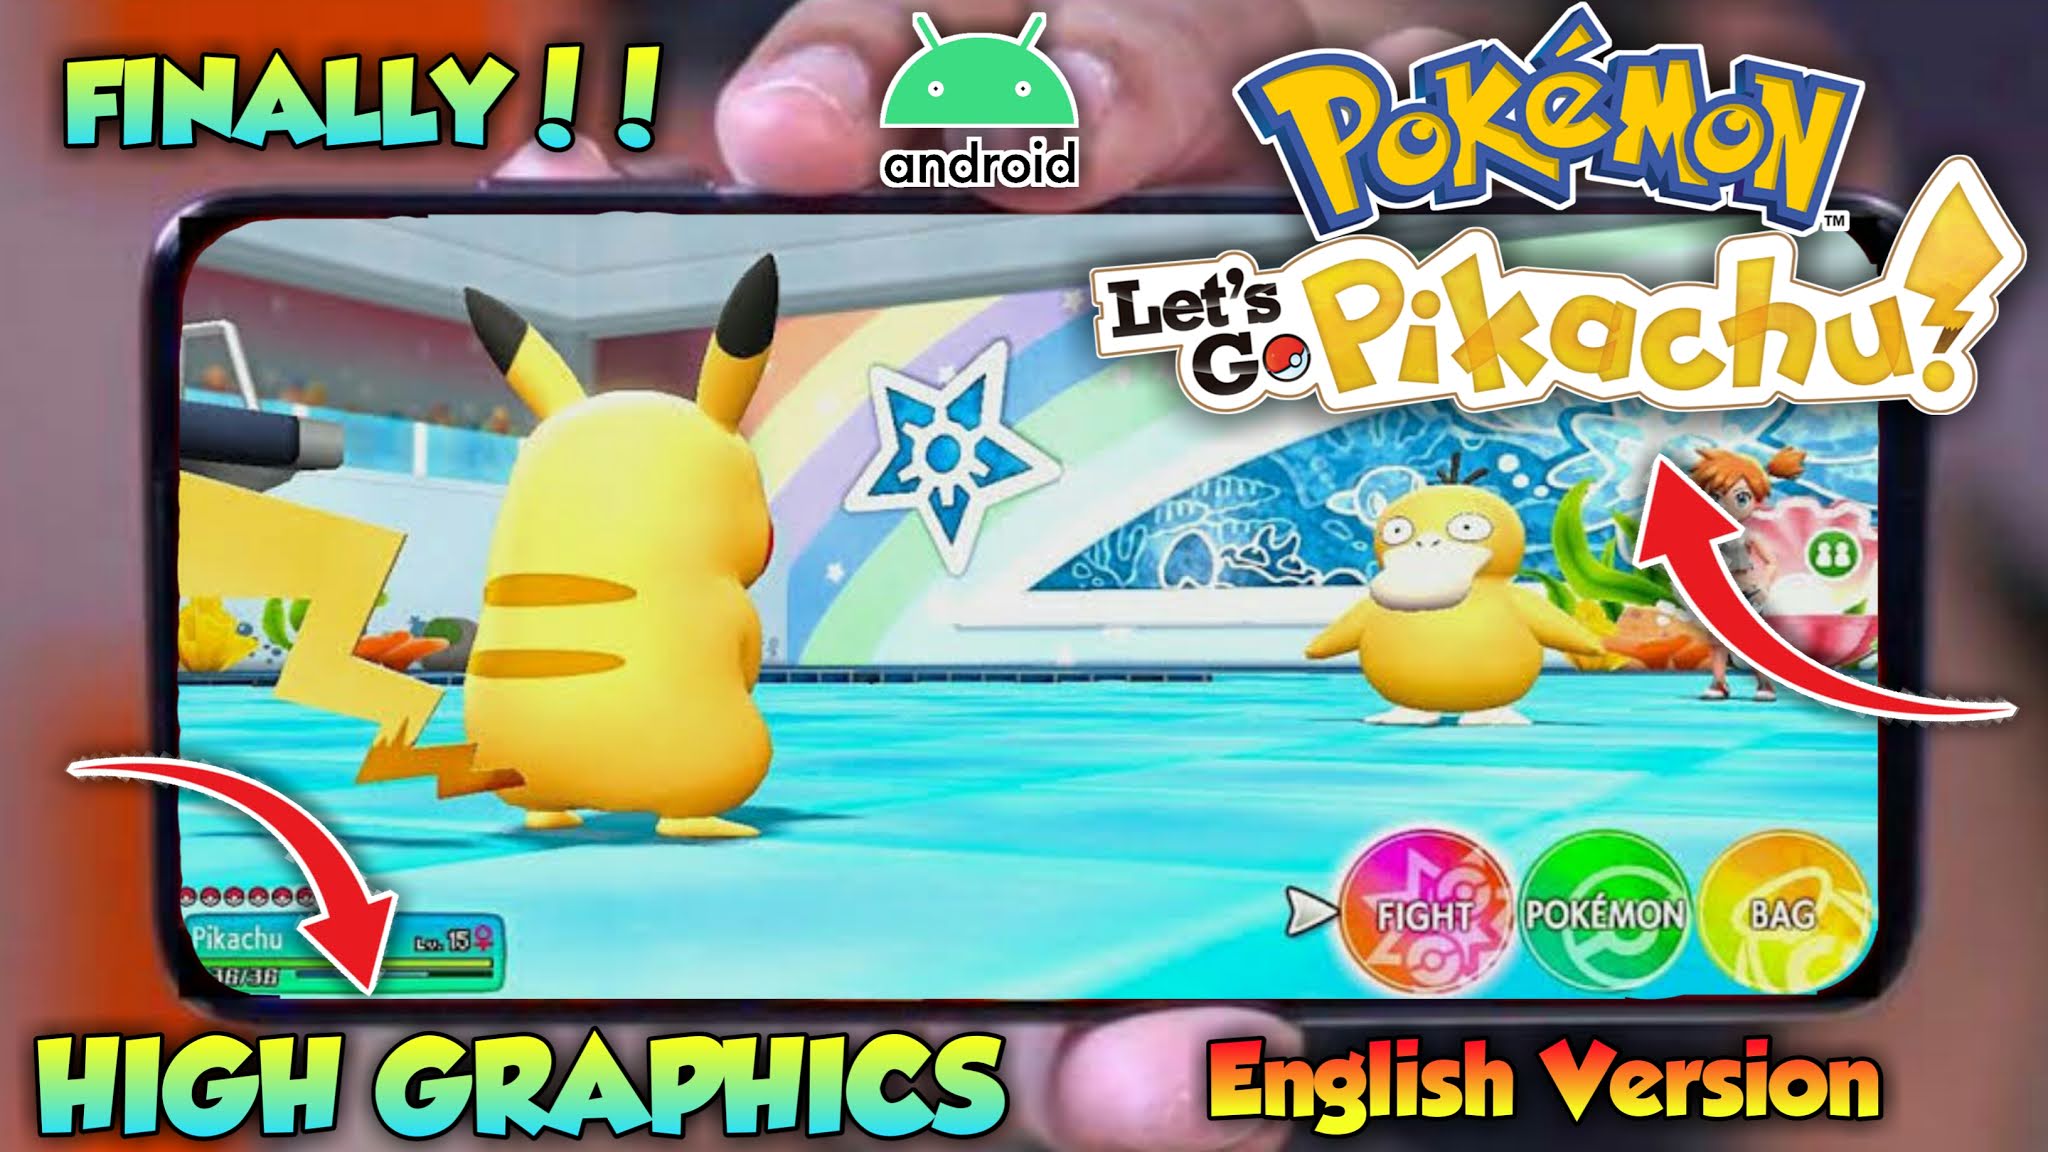 Stream Pokemon Let 39;s Go Pikachu Mod Apk Download VERIFIED For Android by  SubmiXturma